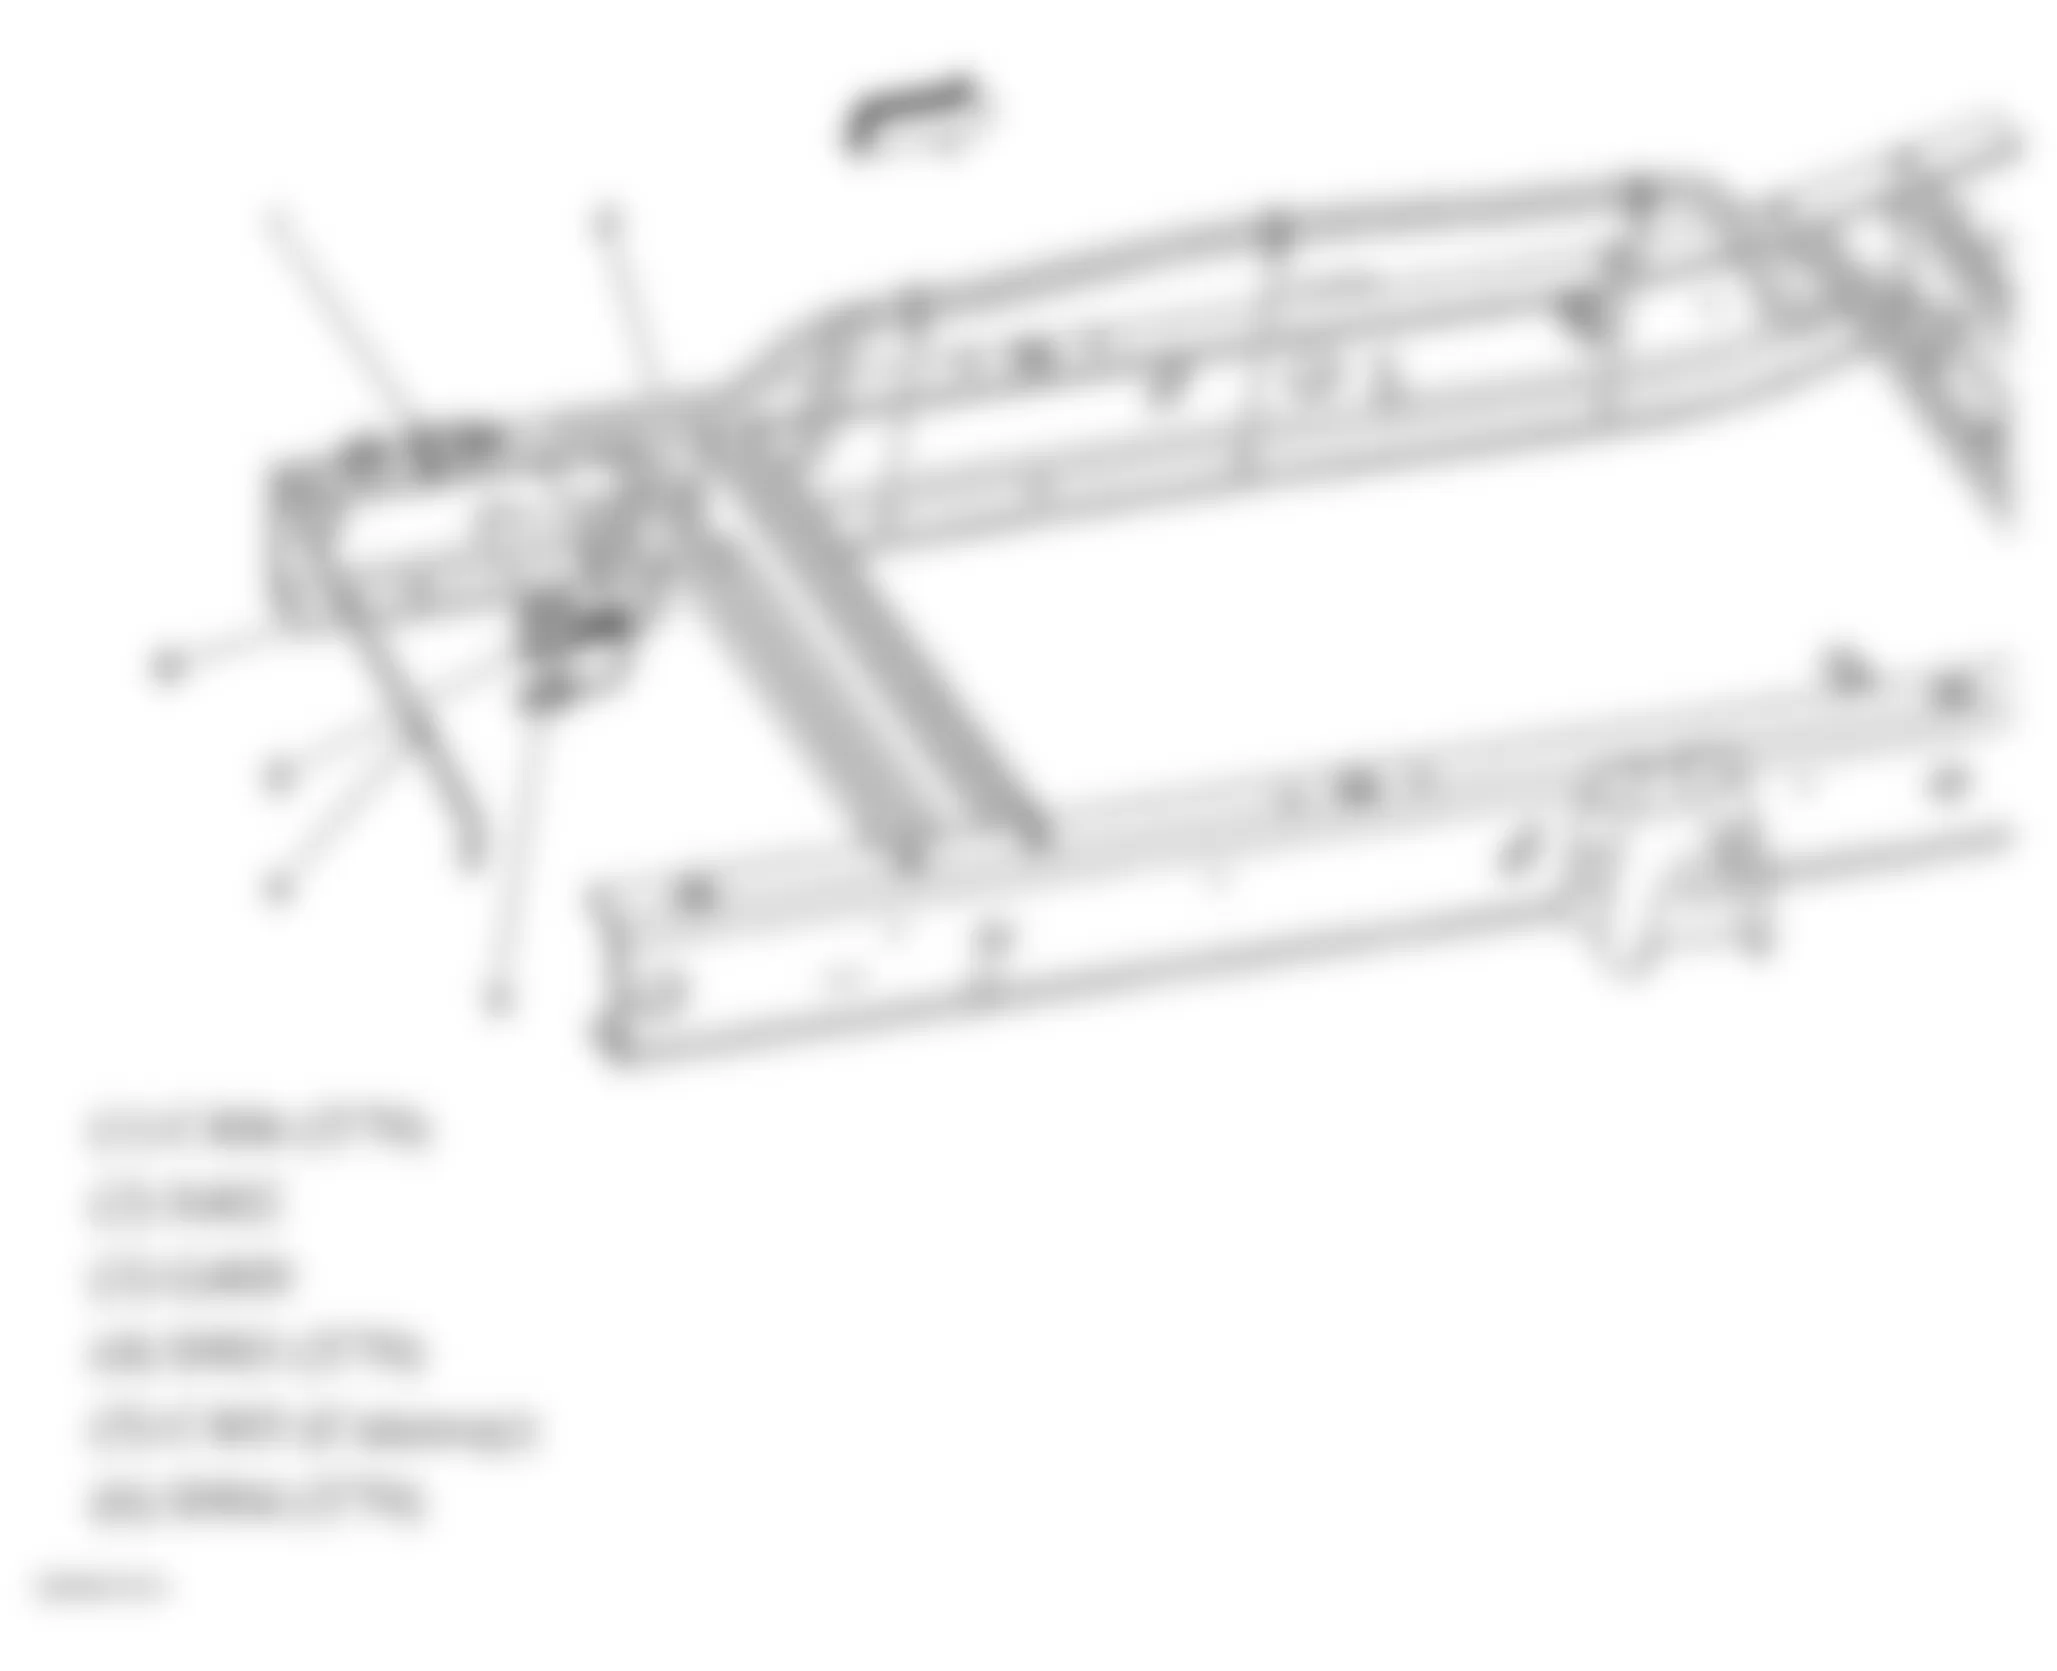 GMC Savana Special G3500 2009 - Component Locations -  Rear Chassis (Cutaway)